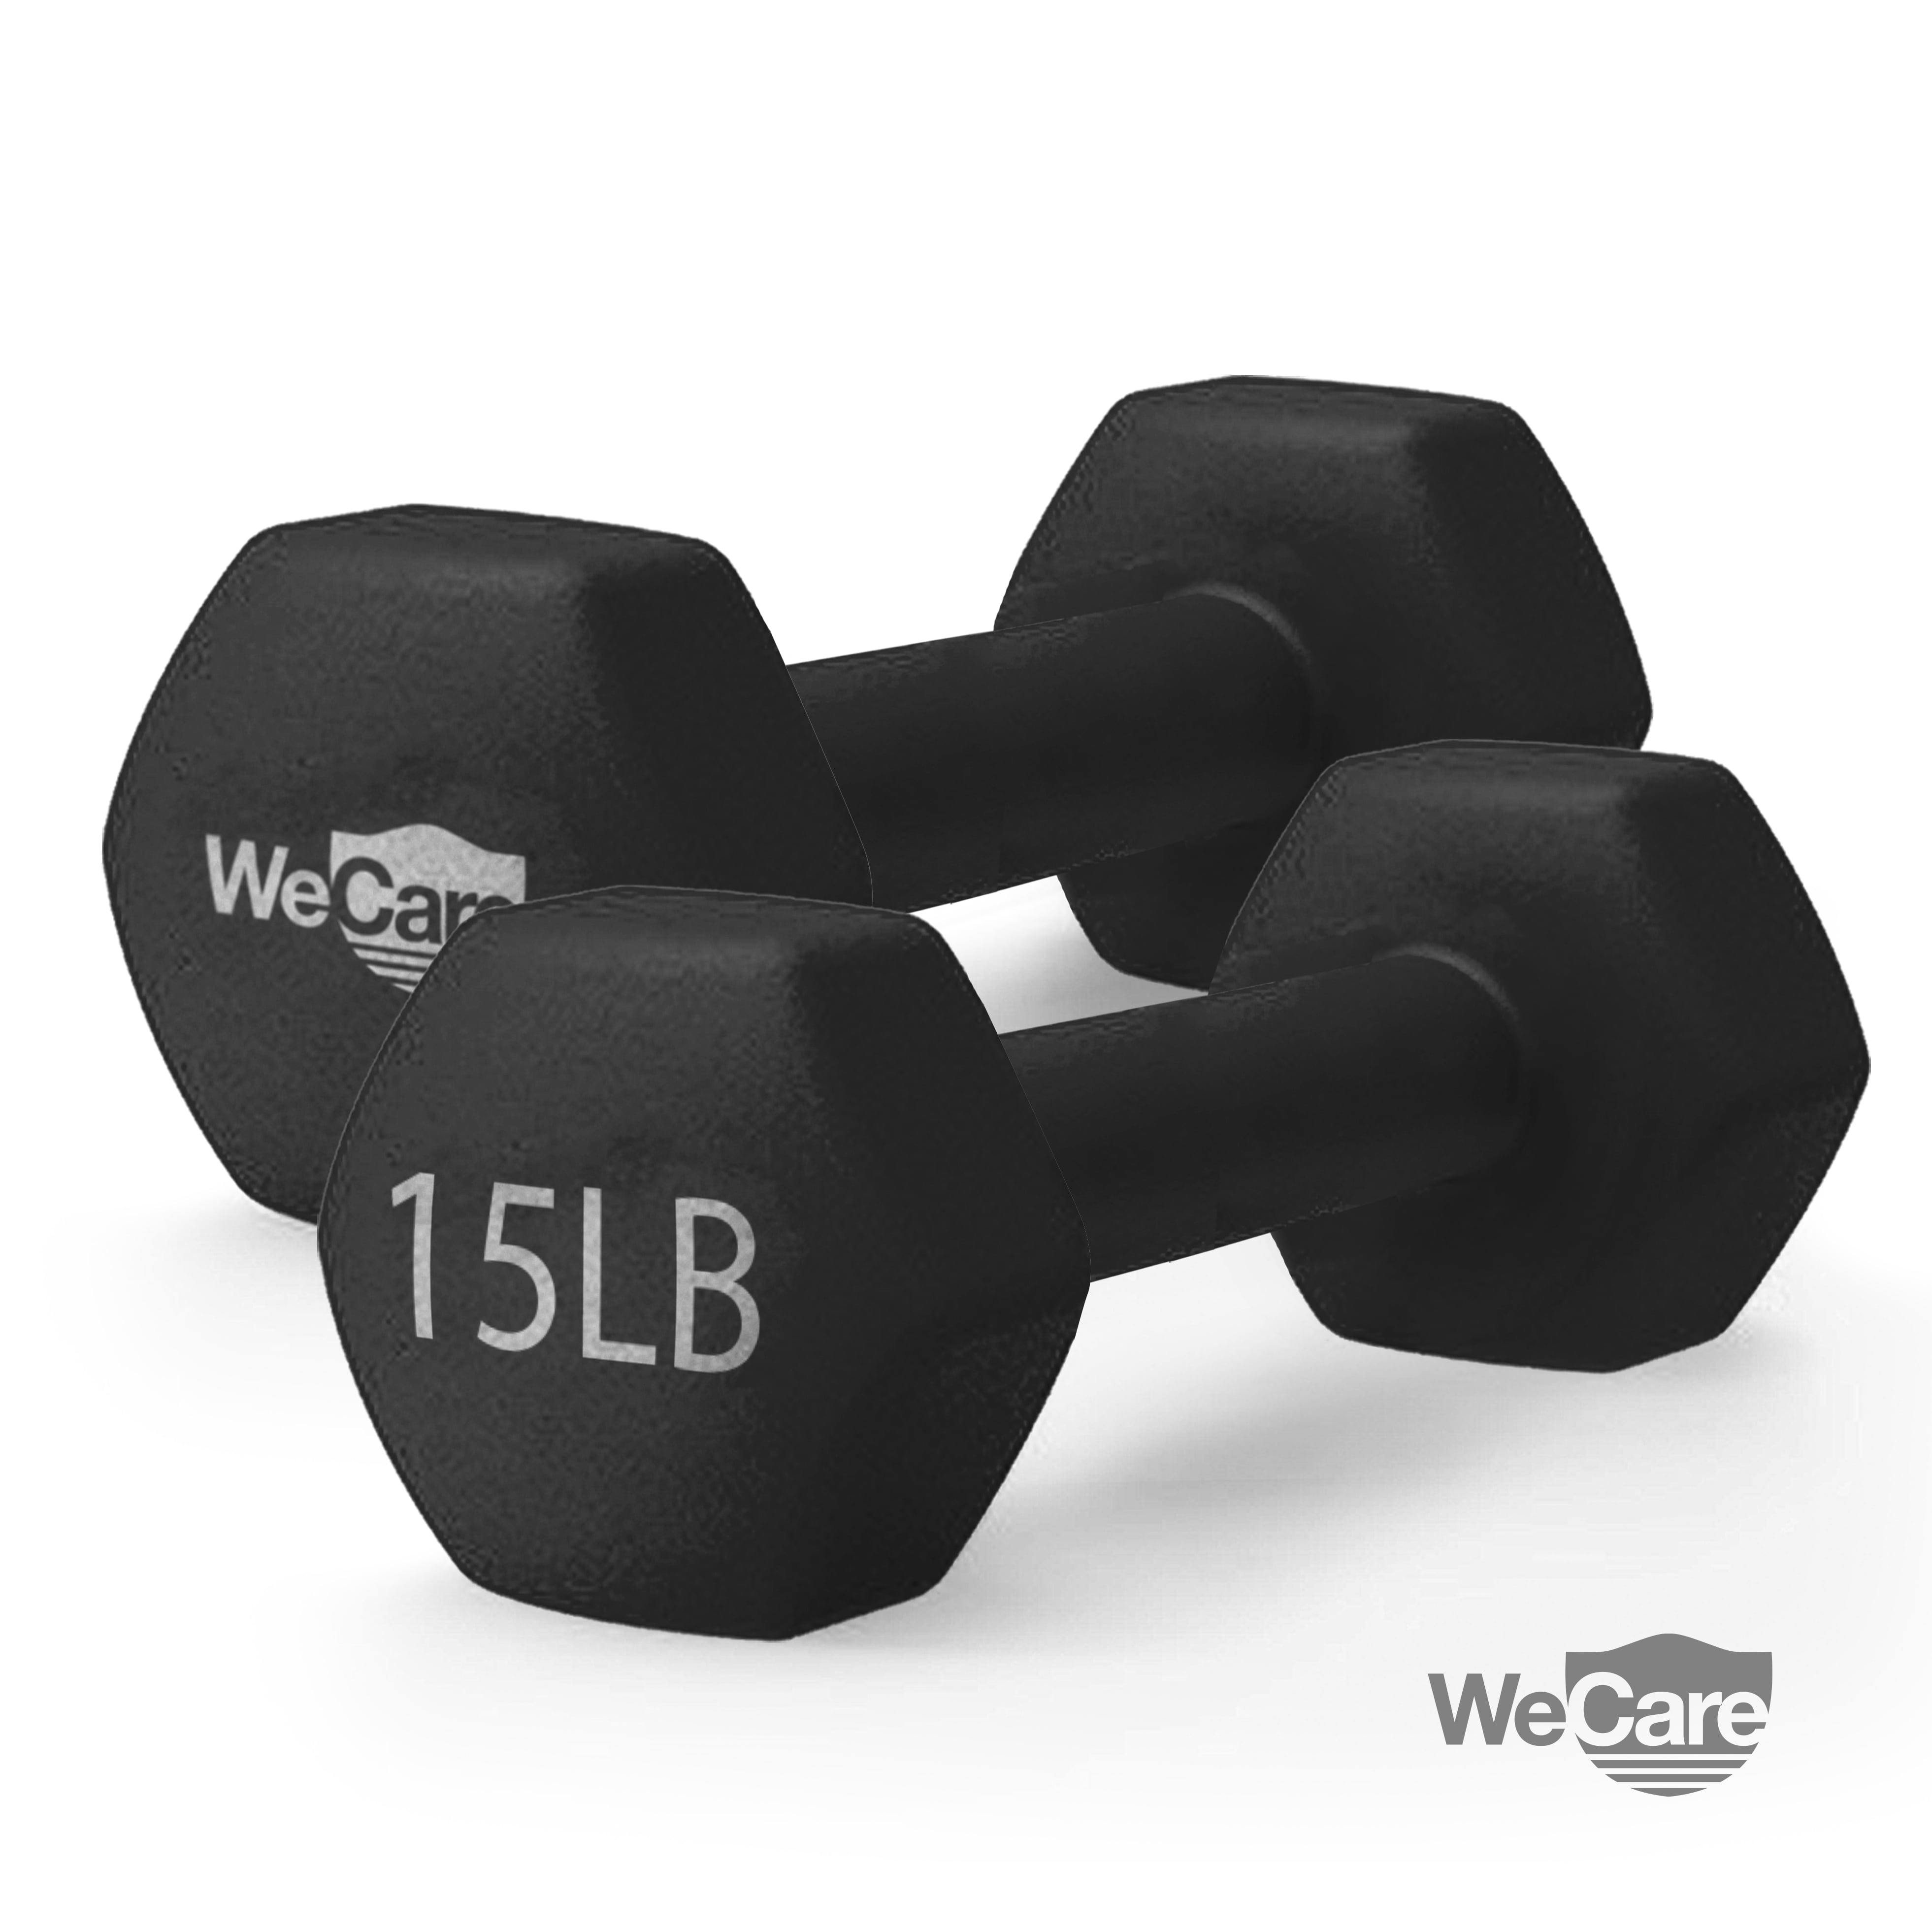 20kg Home Gym Pair of Hex Dumbbells Black Cast Iron Rubber Coated Weights 2kg 